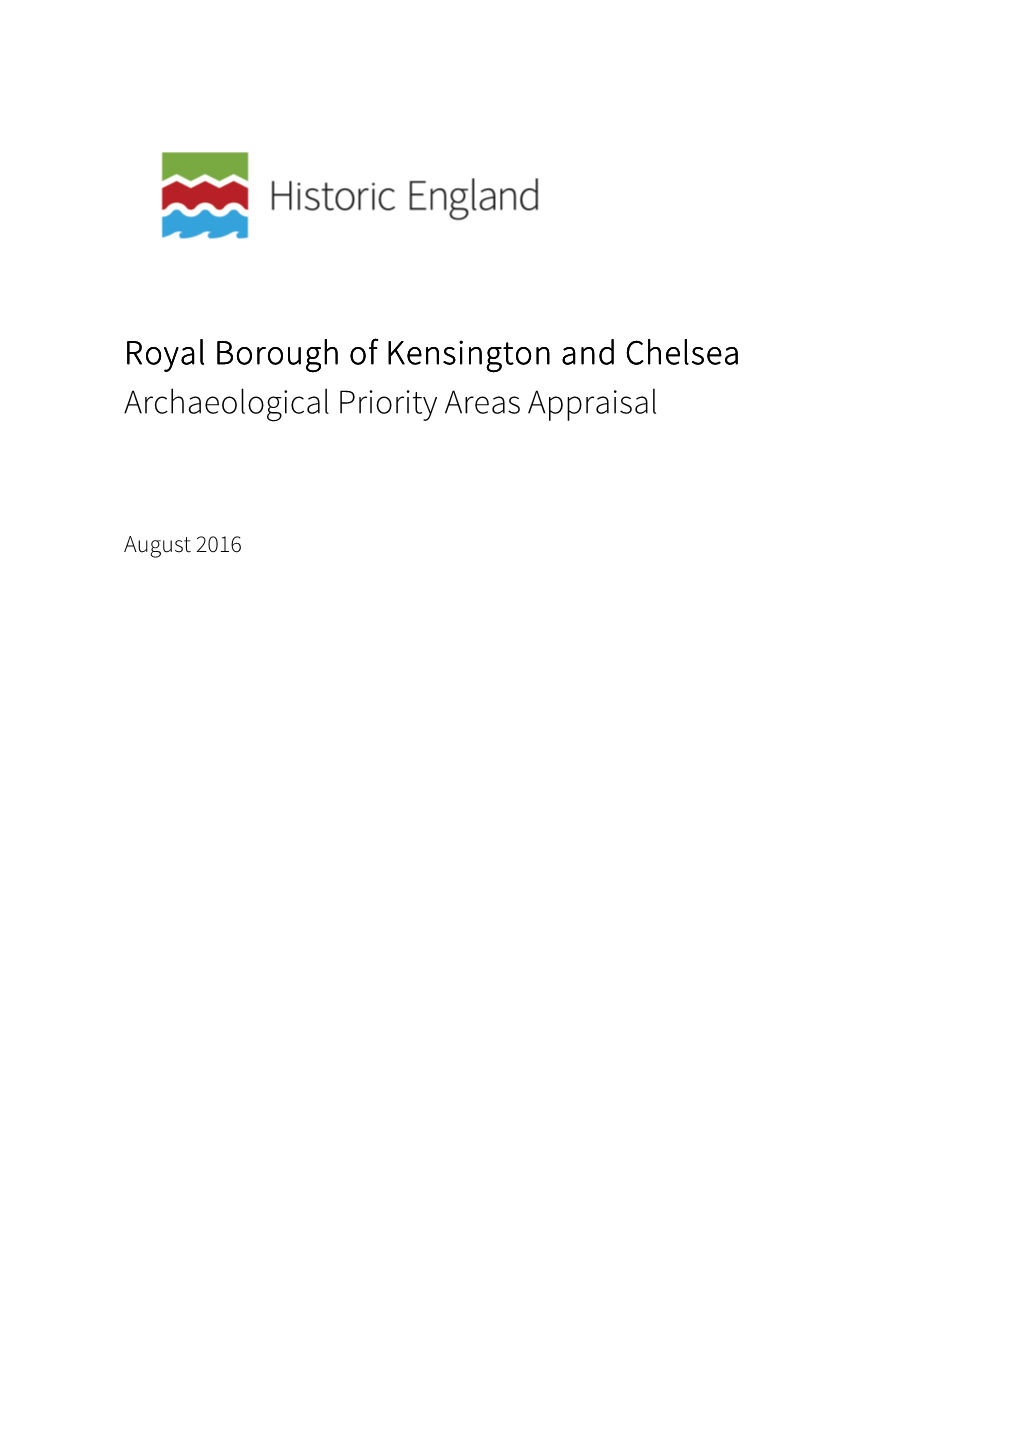 Kensington and Chelsea Archaeological Priority Areas Appraisal